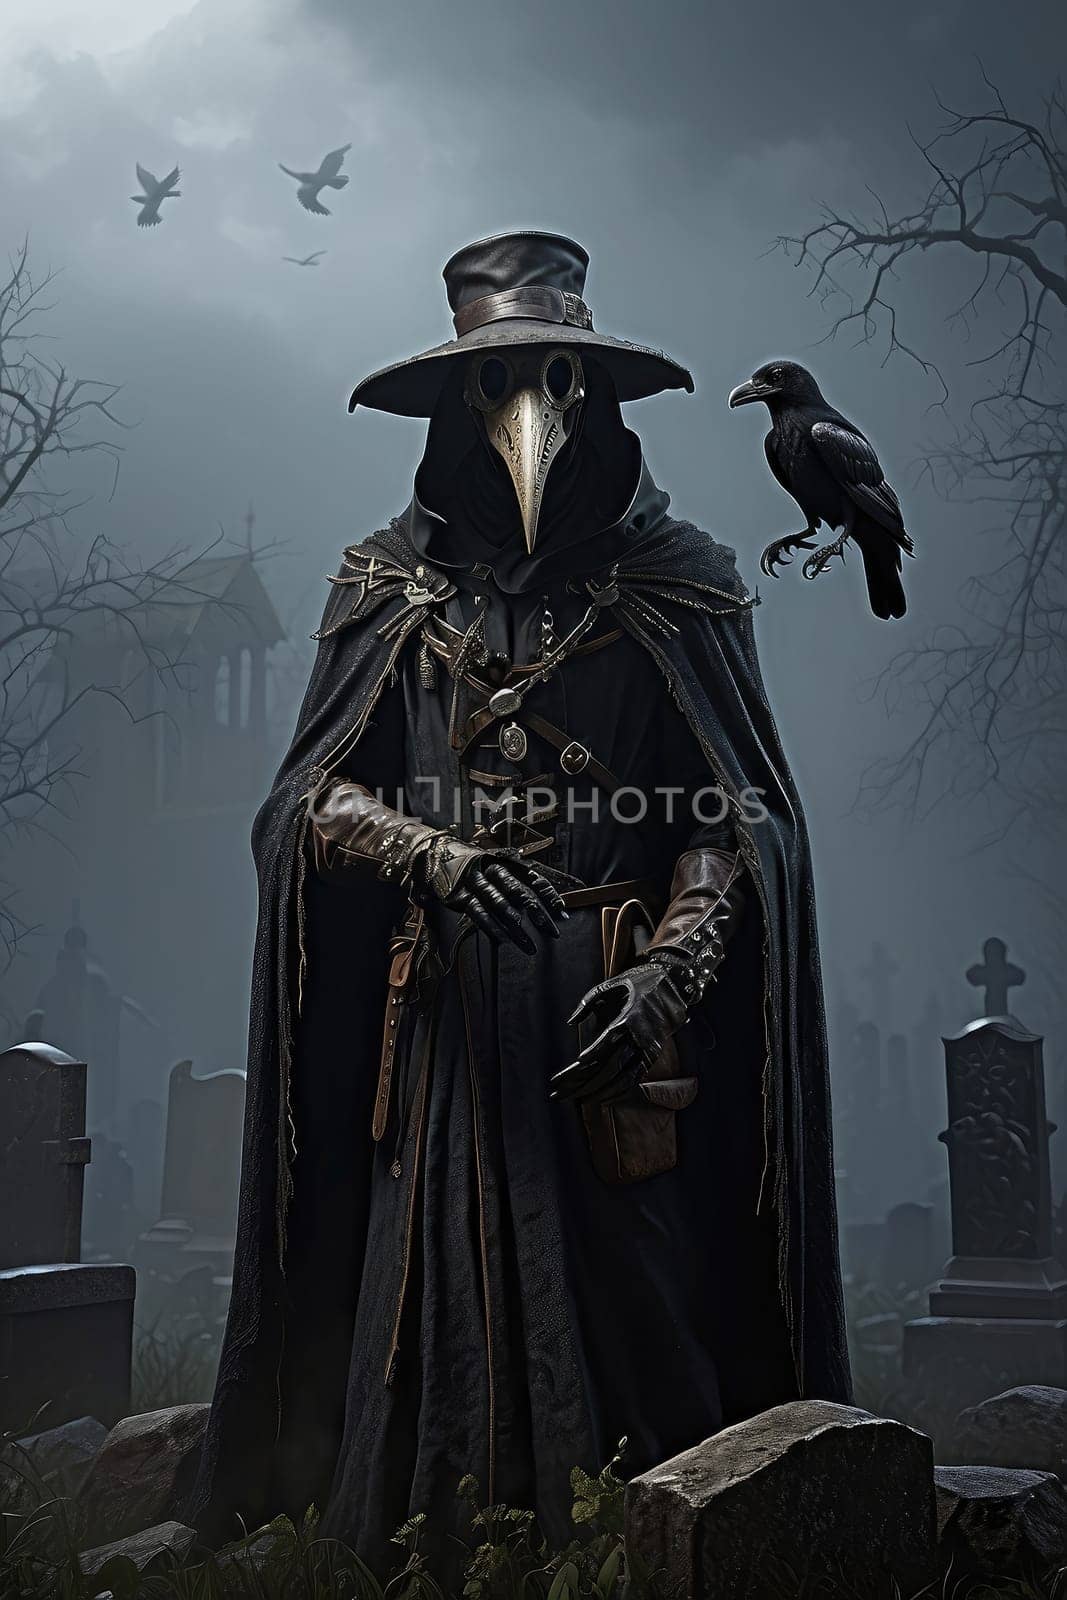 Plague Doctor's Cemetery Raven Mist by applesstock